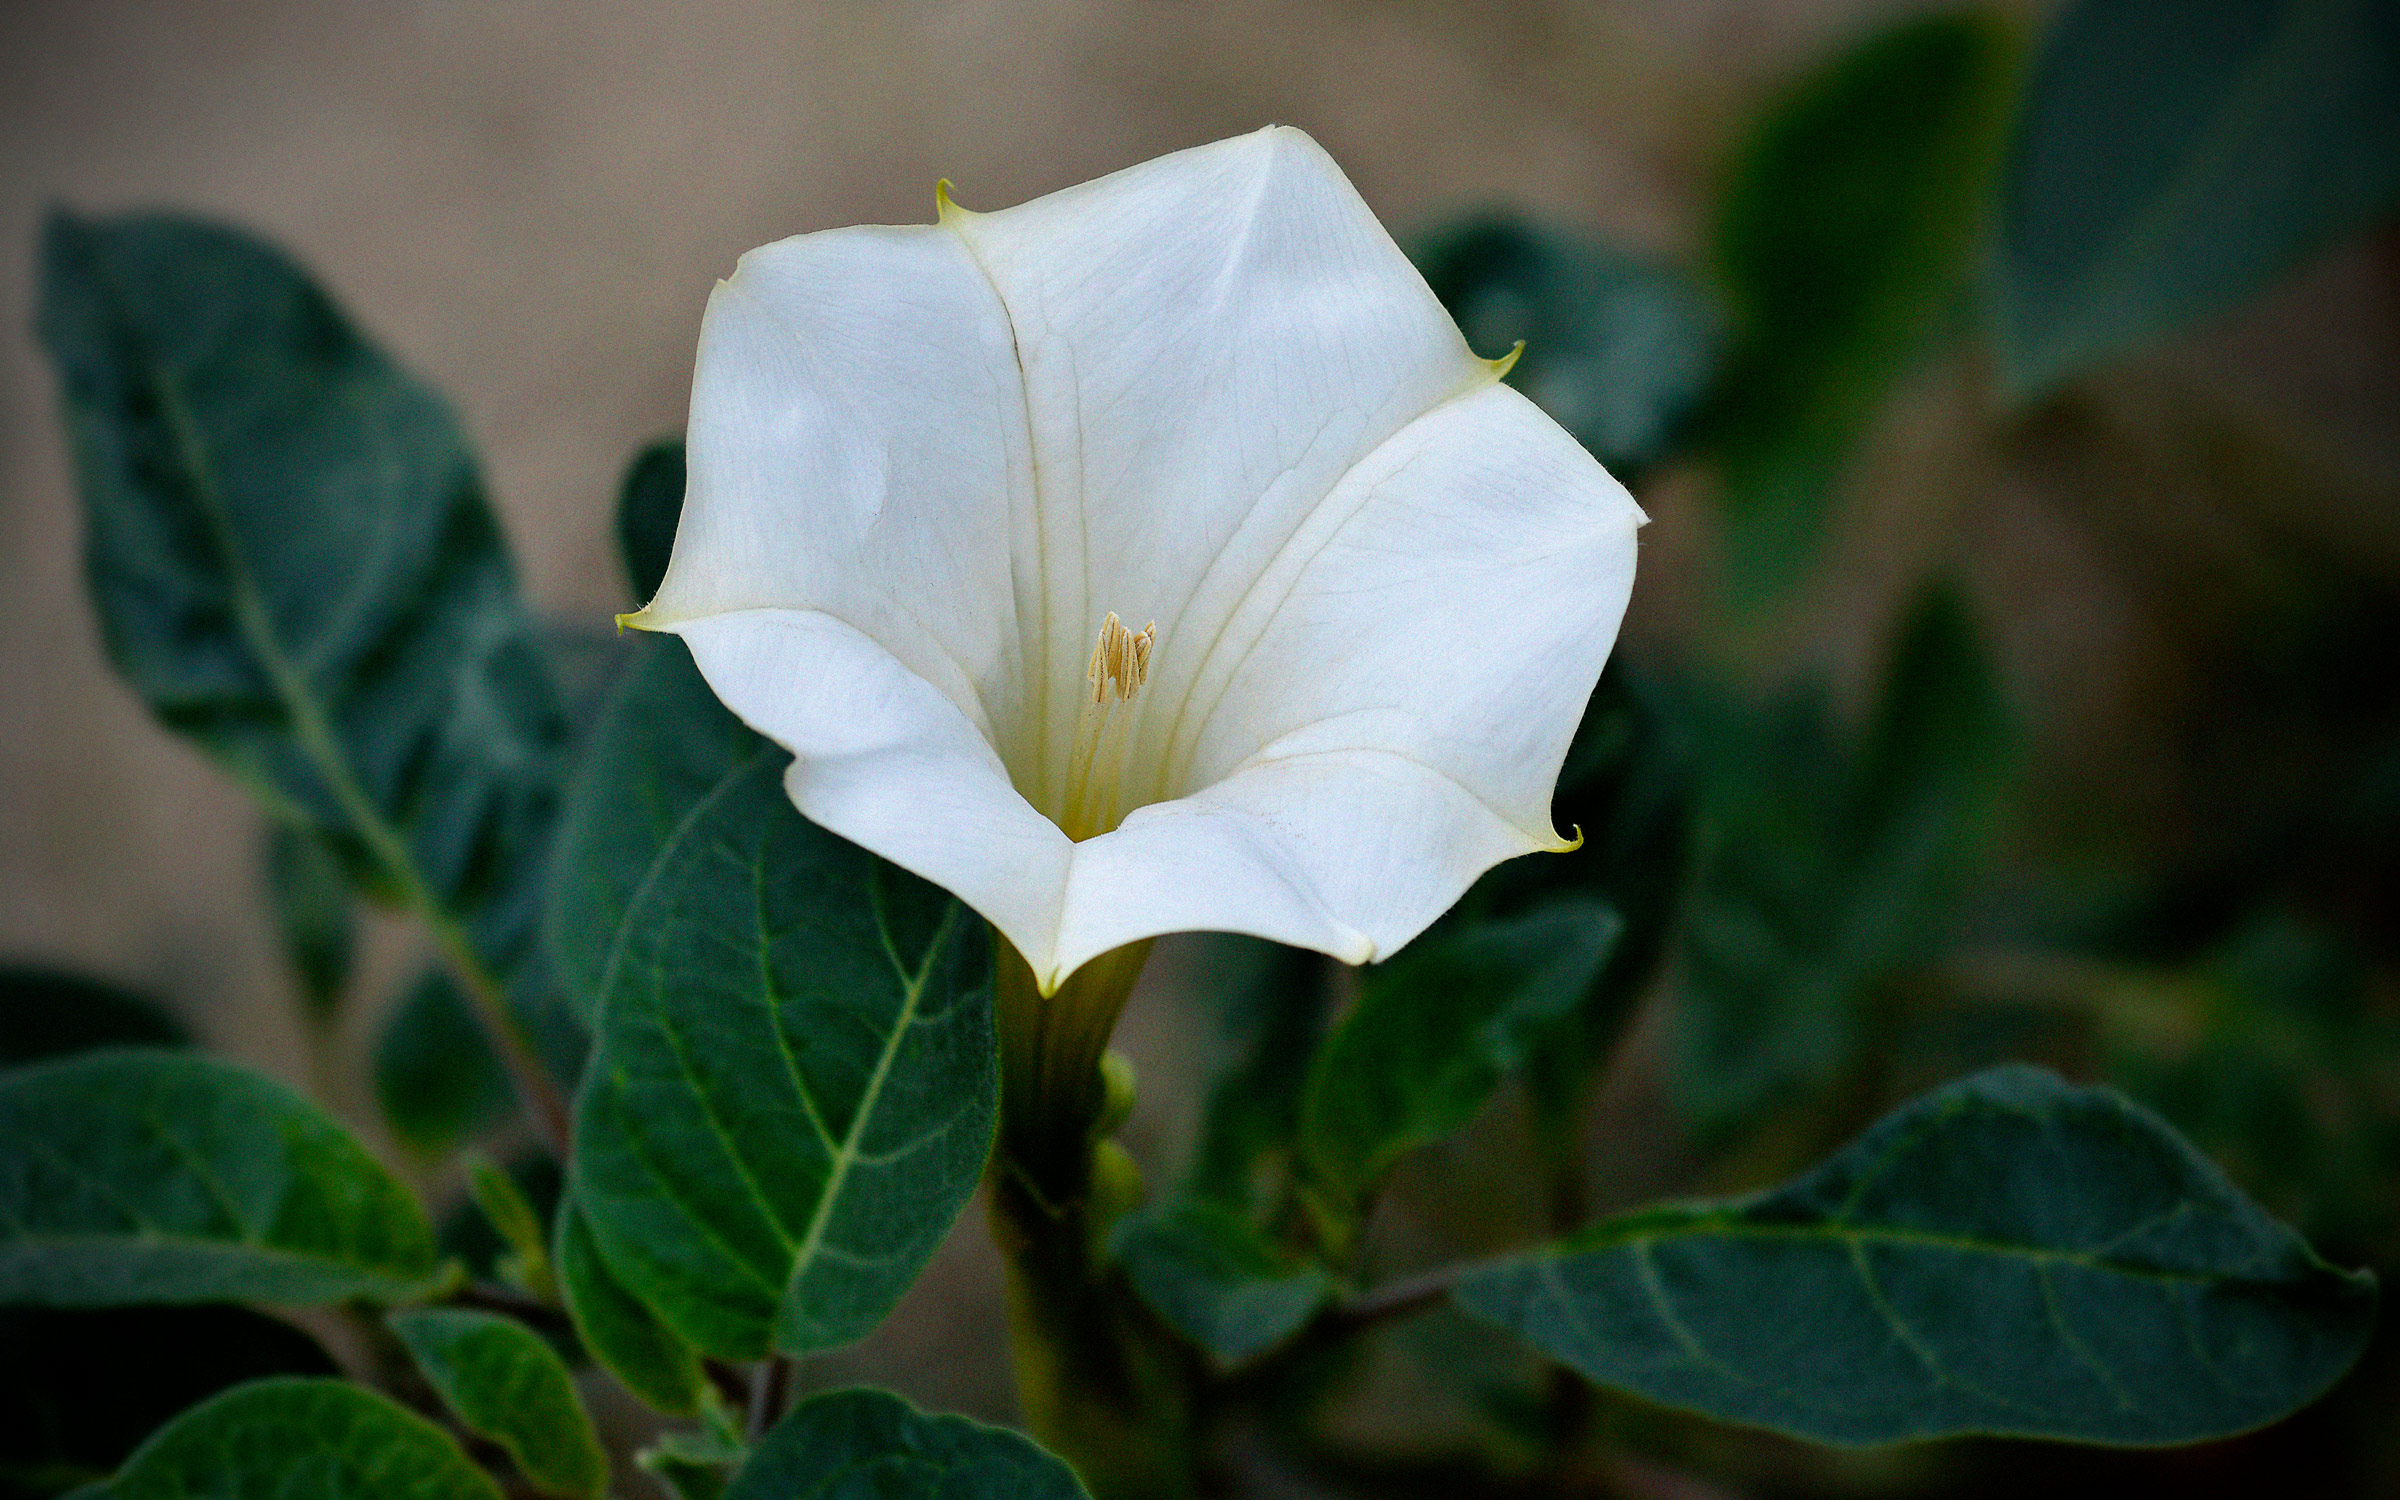 Moonflower, or Datura, Is One of Texas's Most Tenacious Plants